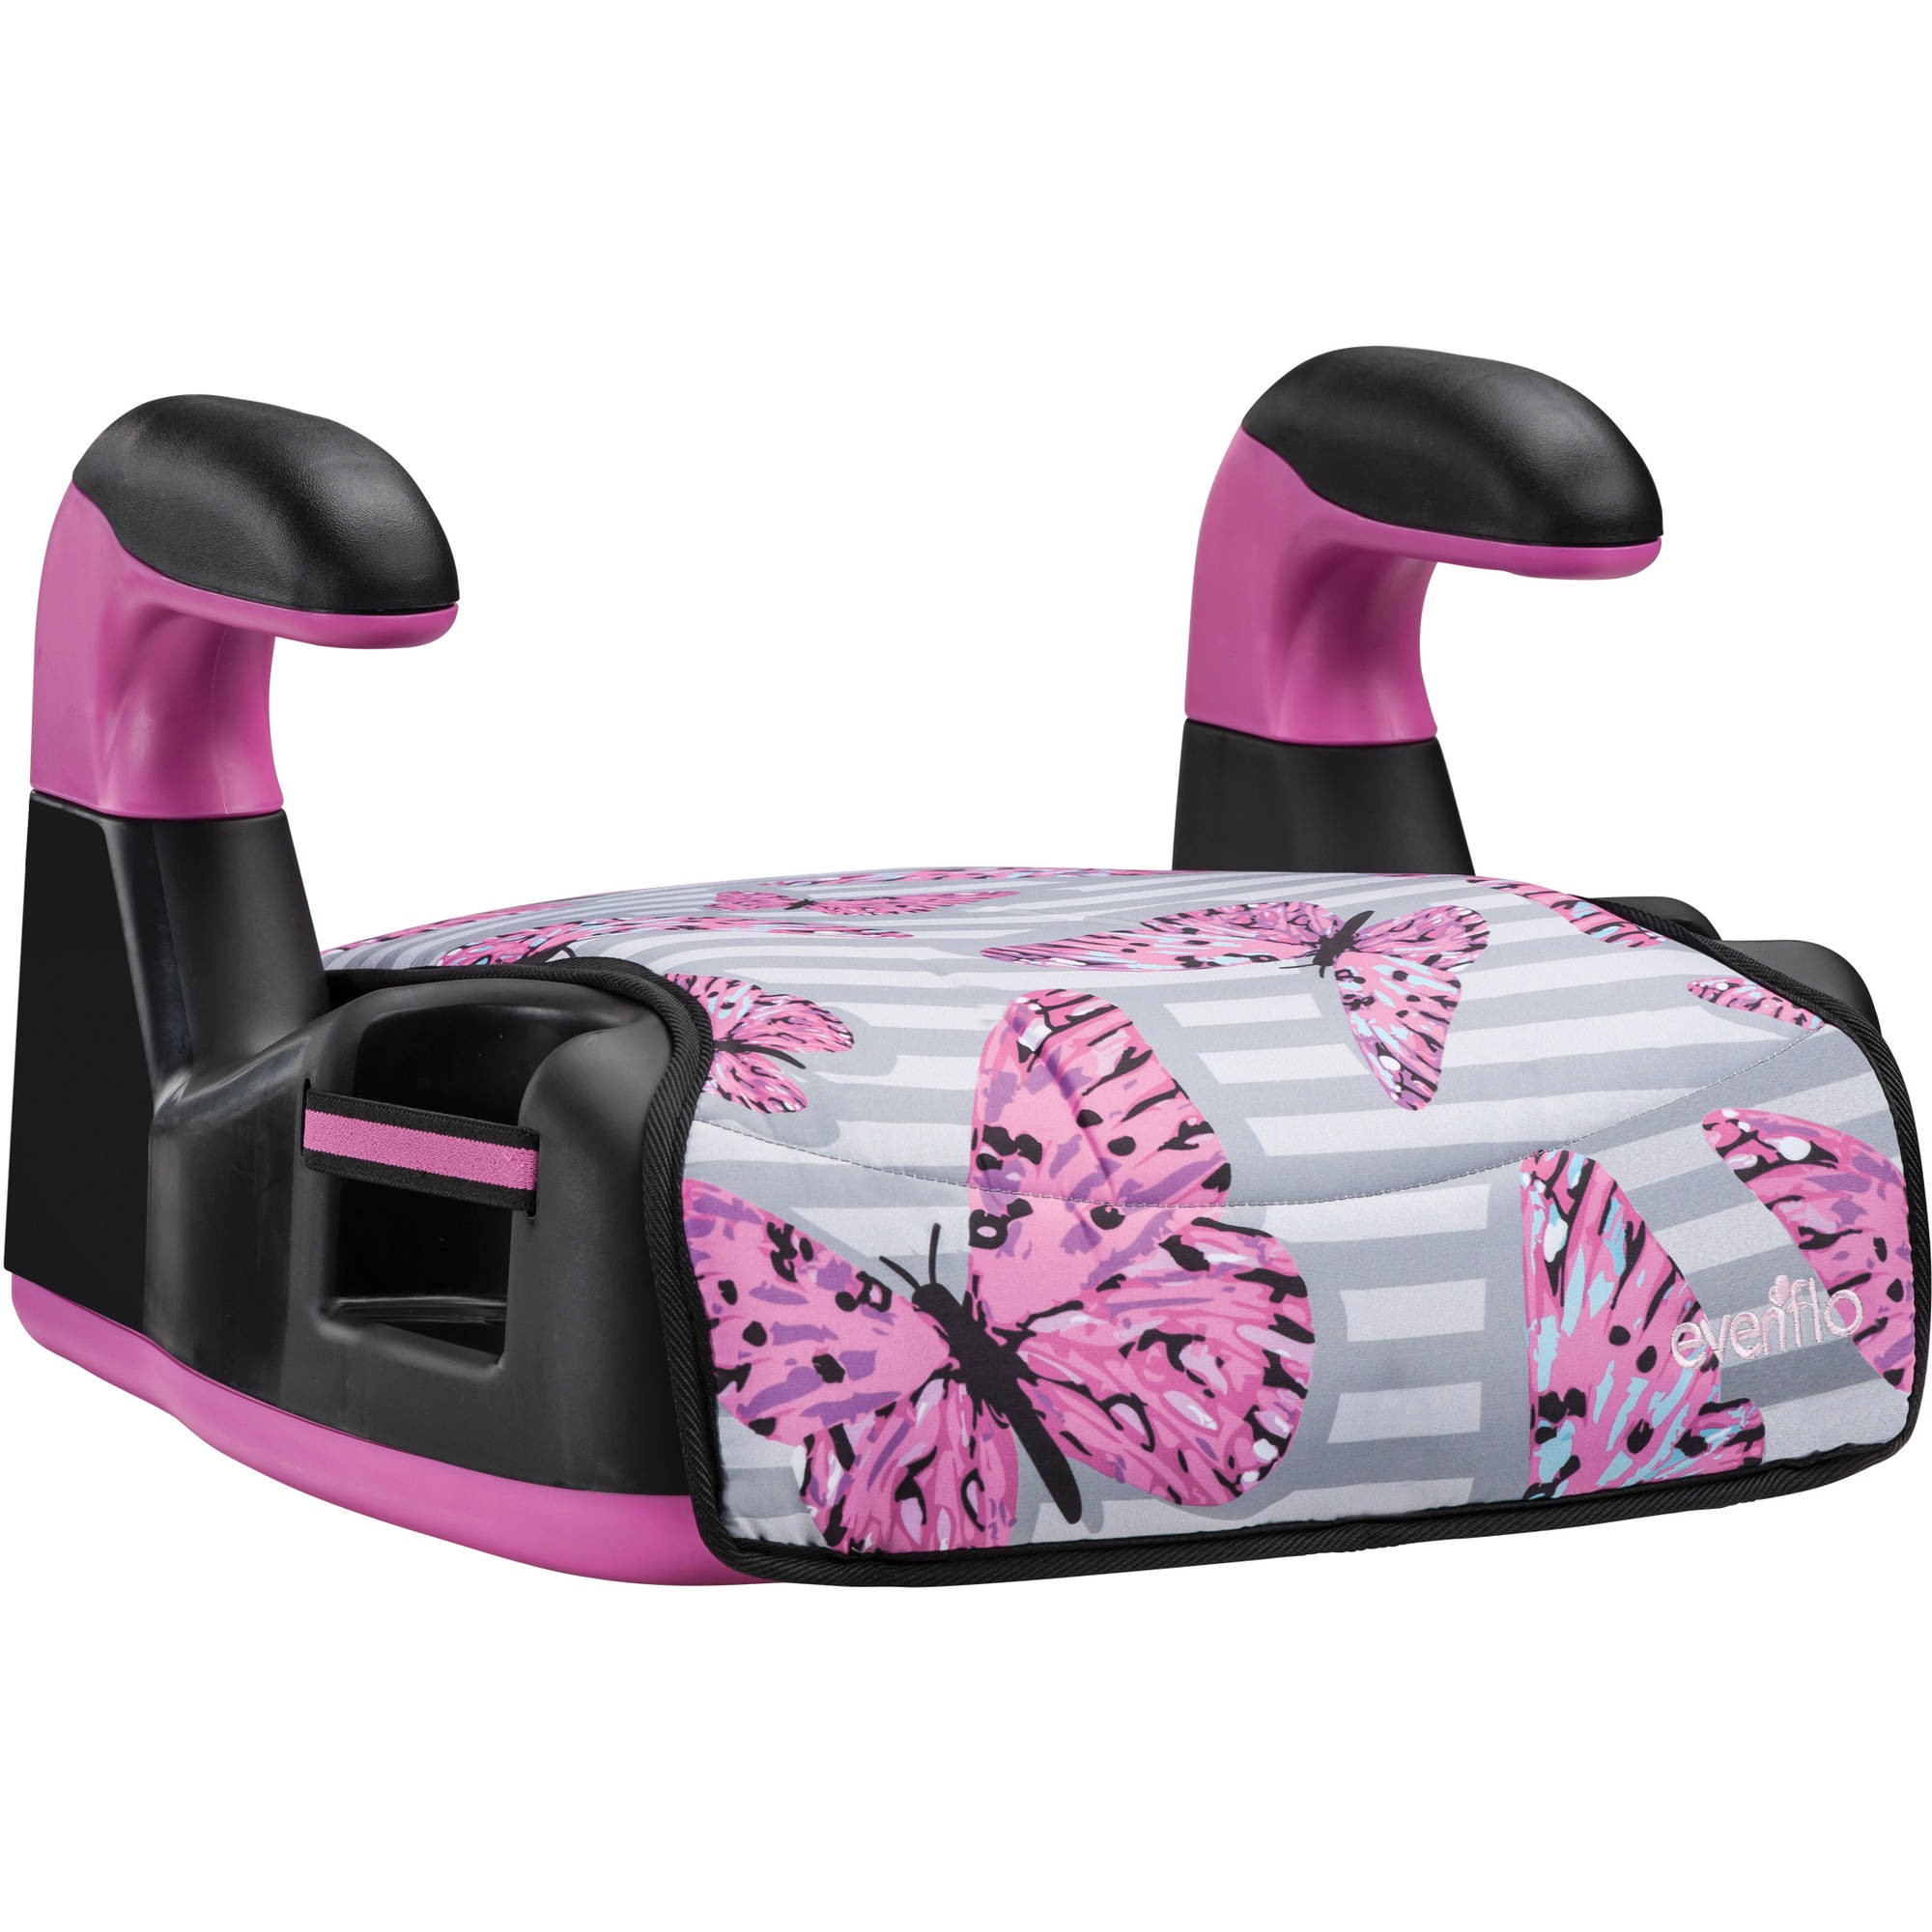 Evenflo AMP Select Backless Booster Car Seat, Butterfly - image 1 of 2